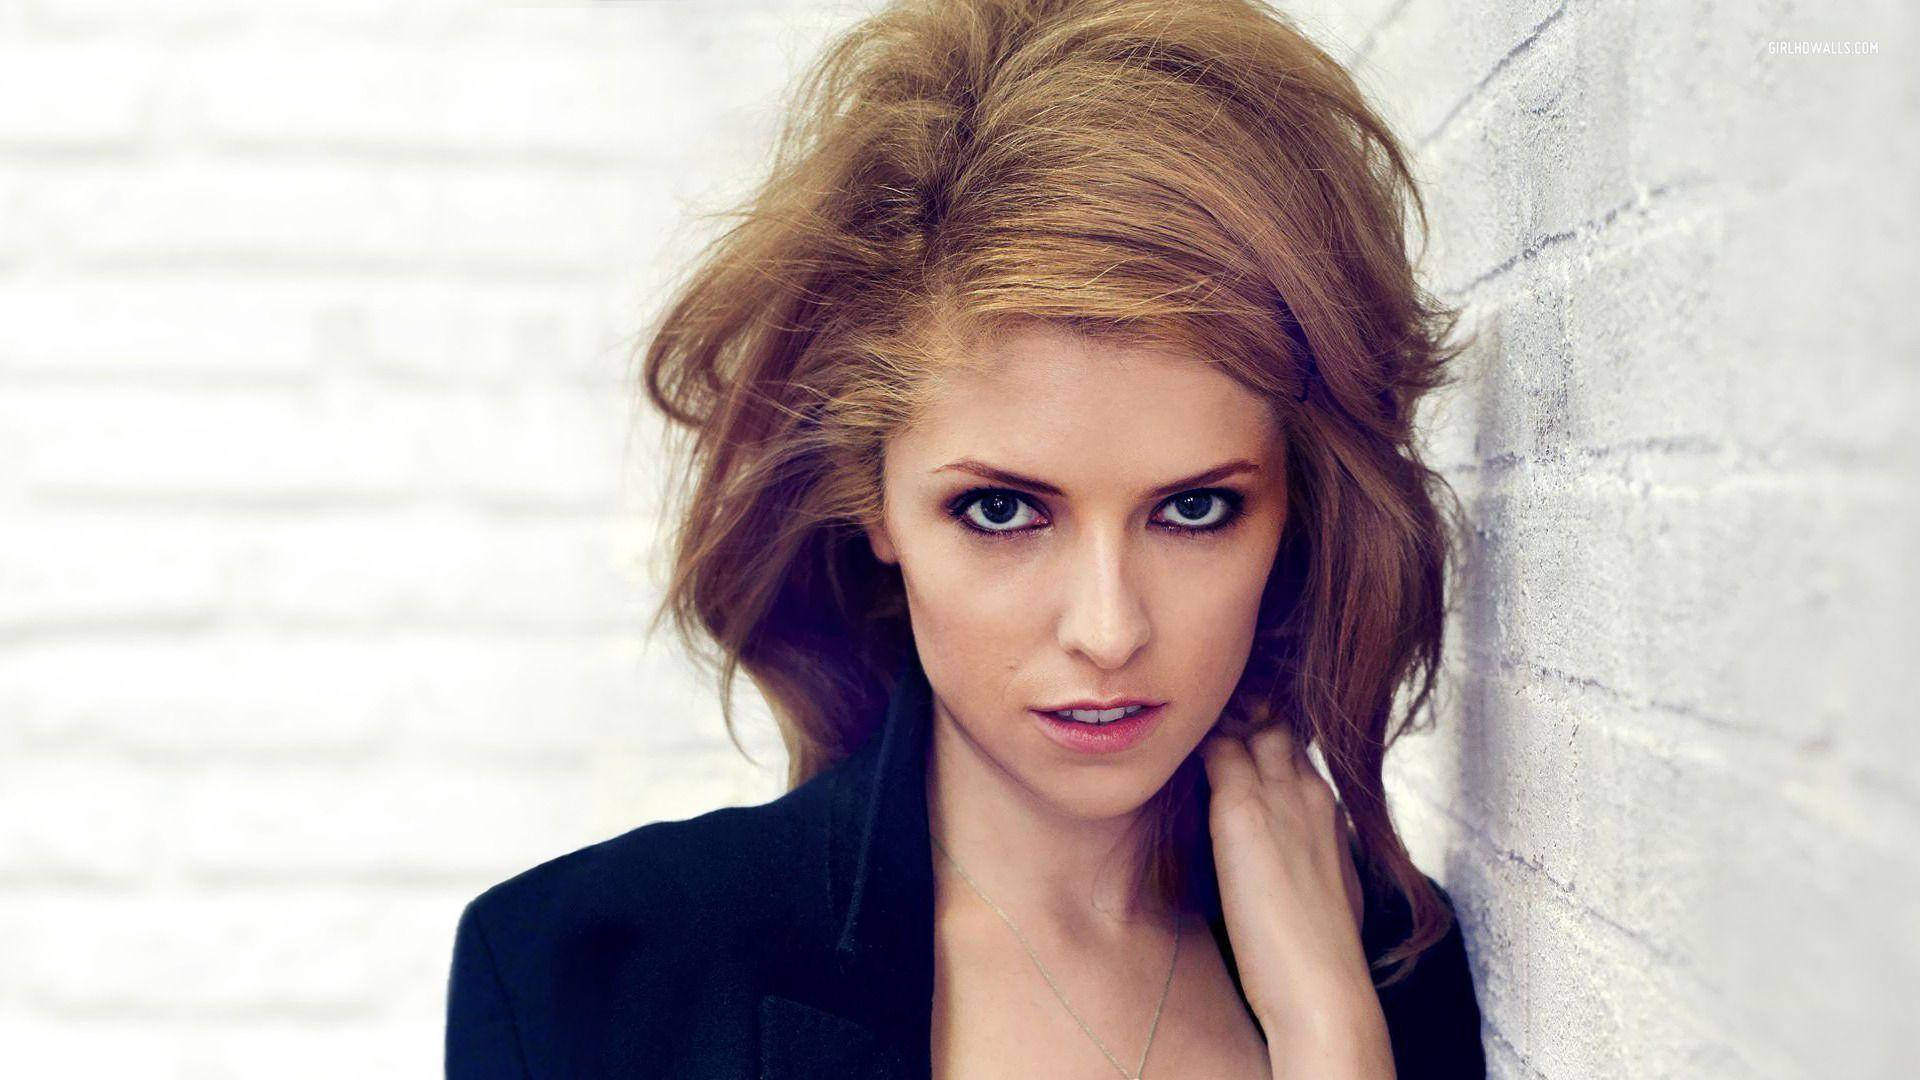 Hollywood Actress Anna Kendrick During A Gq Photoshoot Background